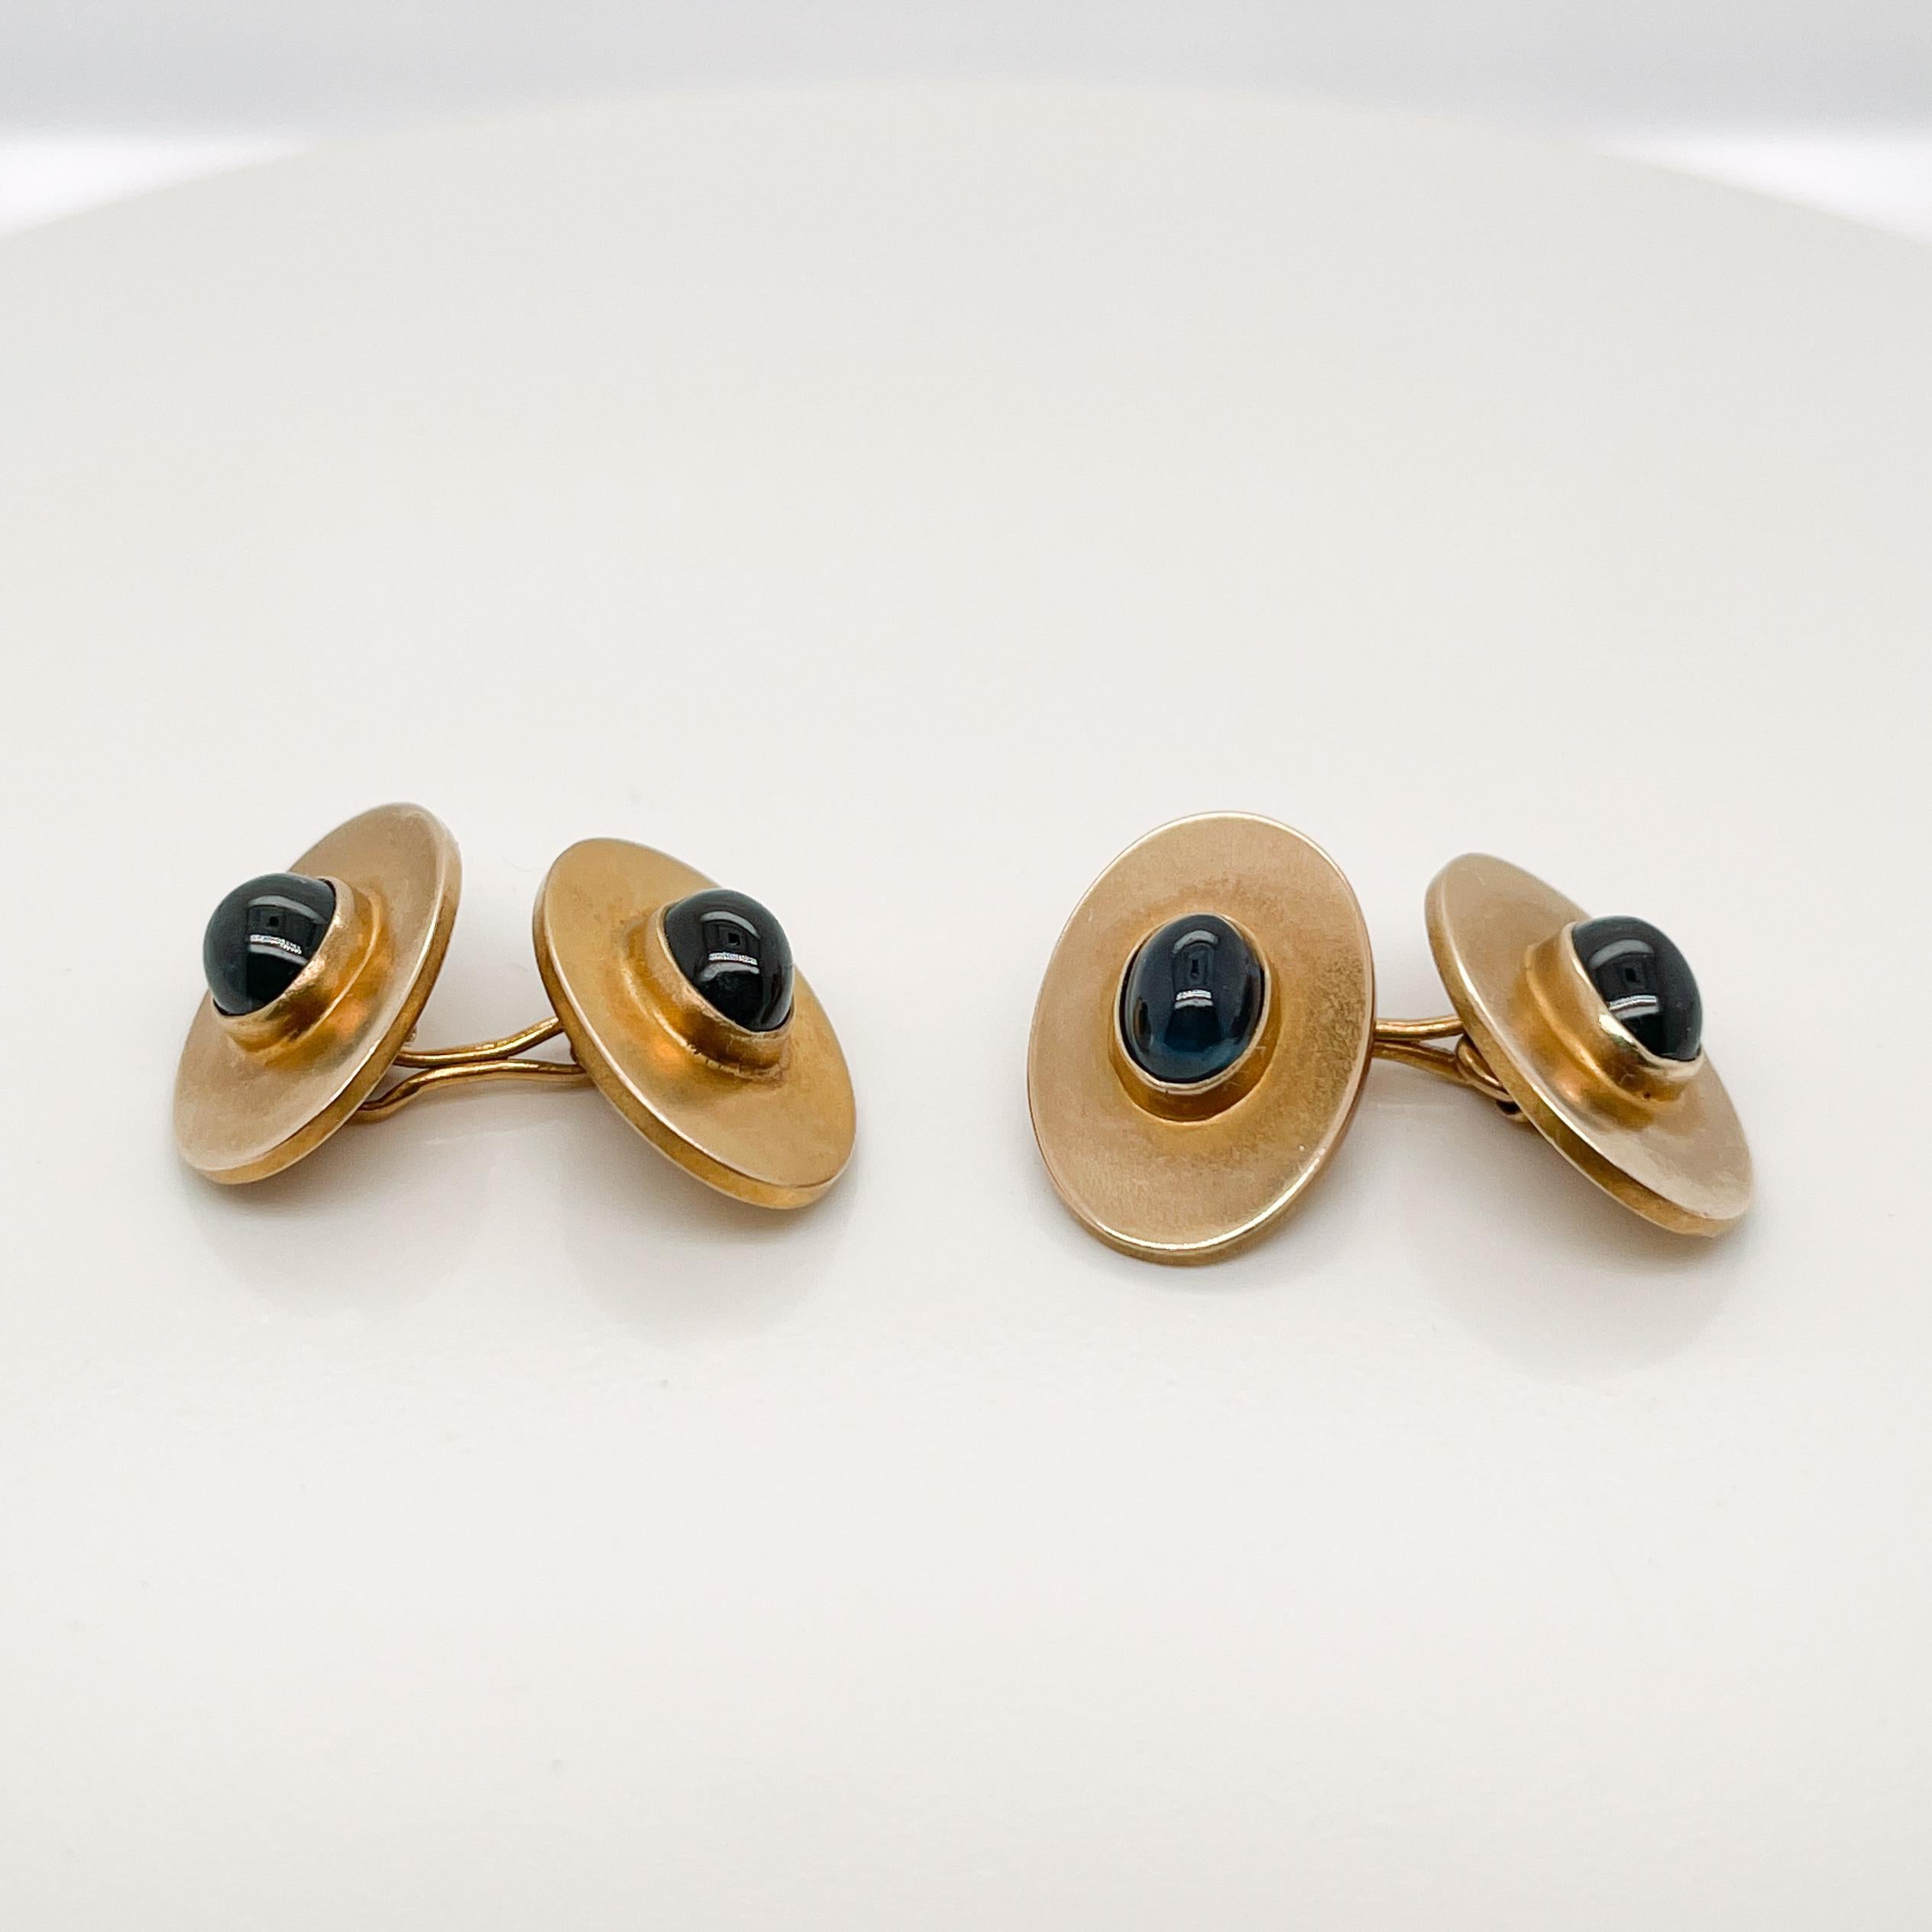 A very fine pair of Riker Bros. gold cufflinks.

With smooth oval sapphire cabochons bezel set in 14k gold ovals.

Simply a wonderful pair of Rikers Bros. cufflinks!

Date:
Late 19th or Early 20th Century

Overall Condition:
They are in overall